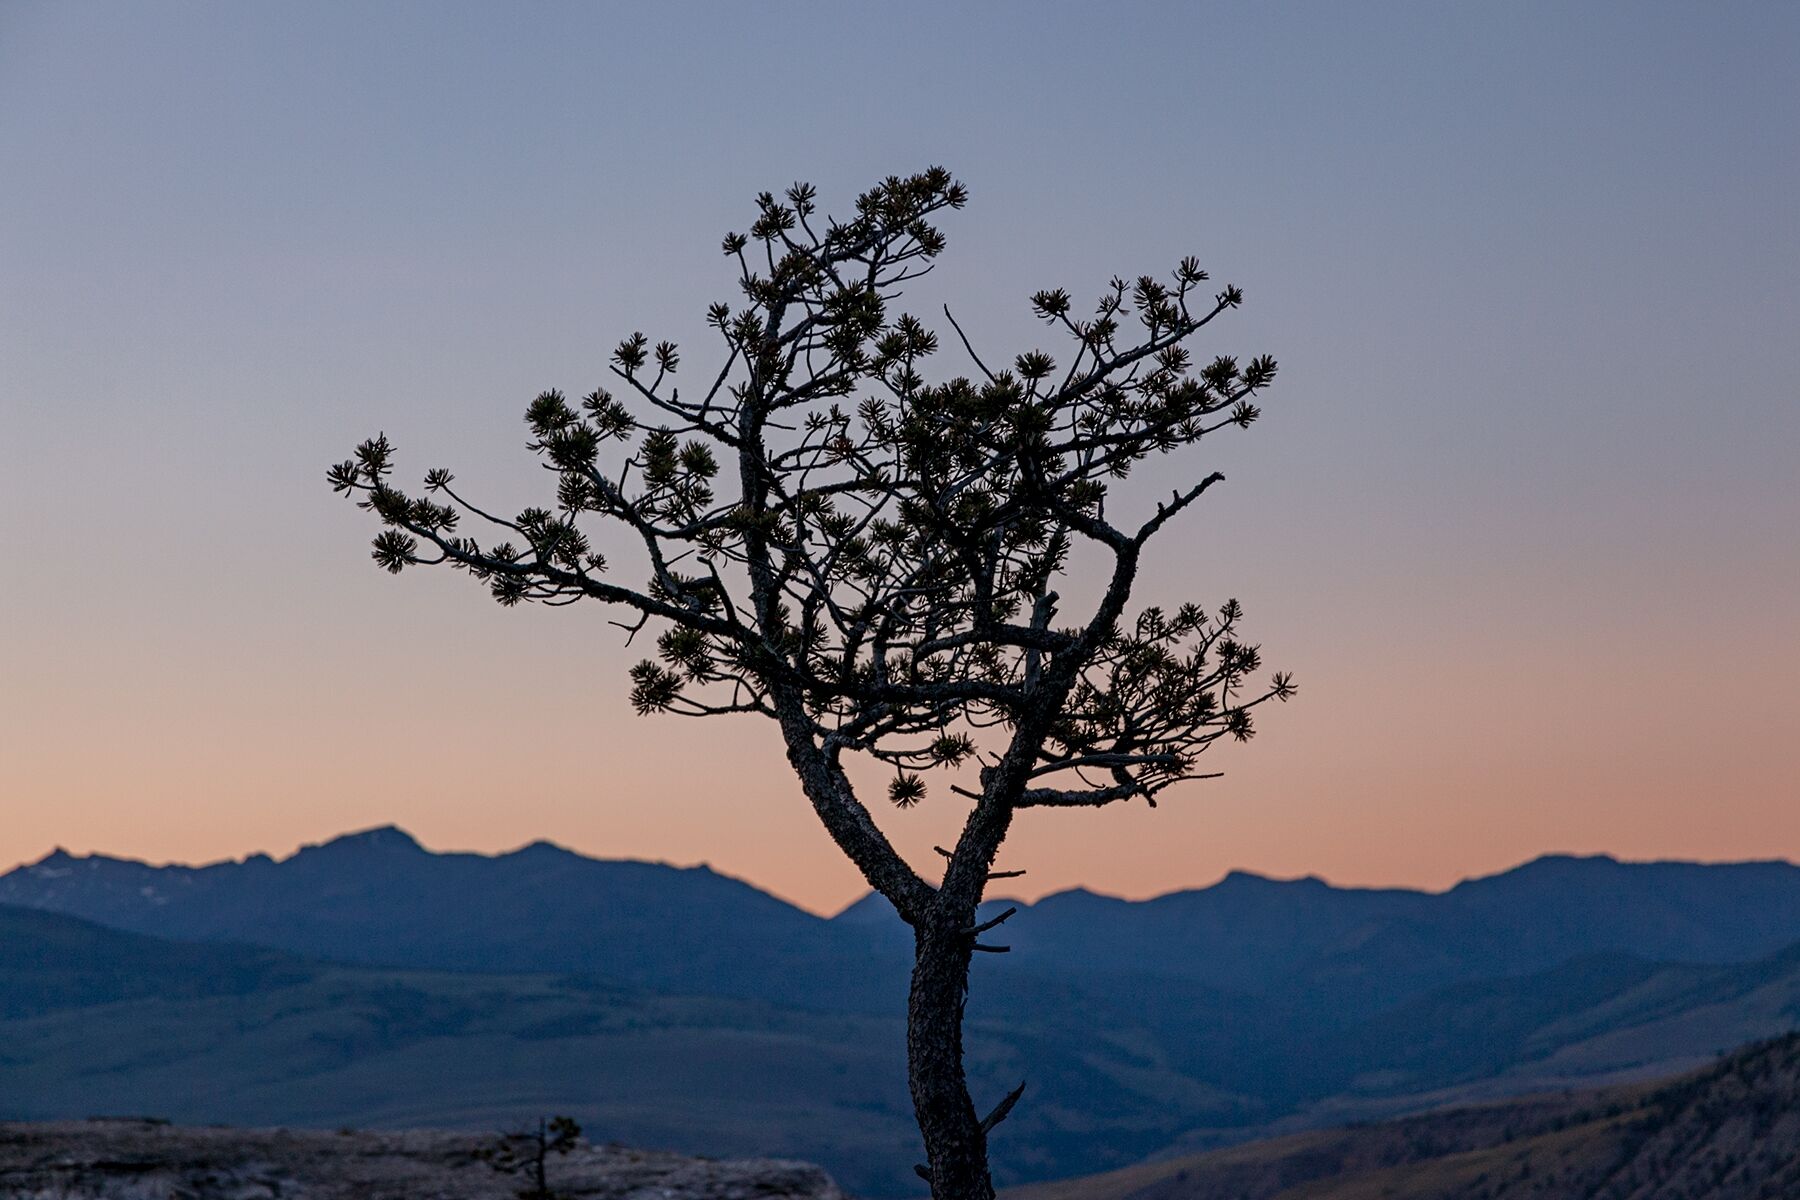 A tree silhouetted by a sunset in Yellowstone National Park, Wyoming